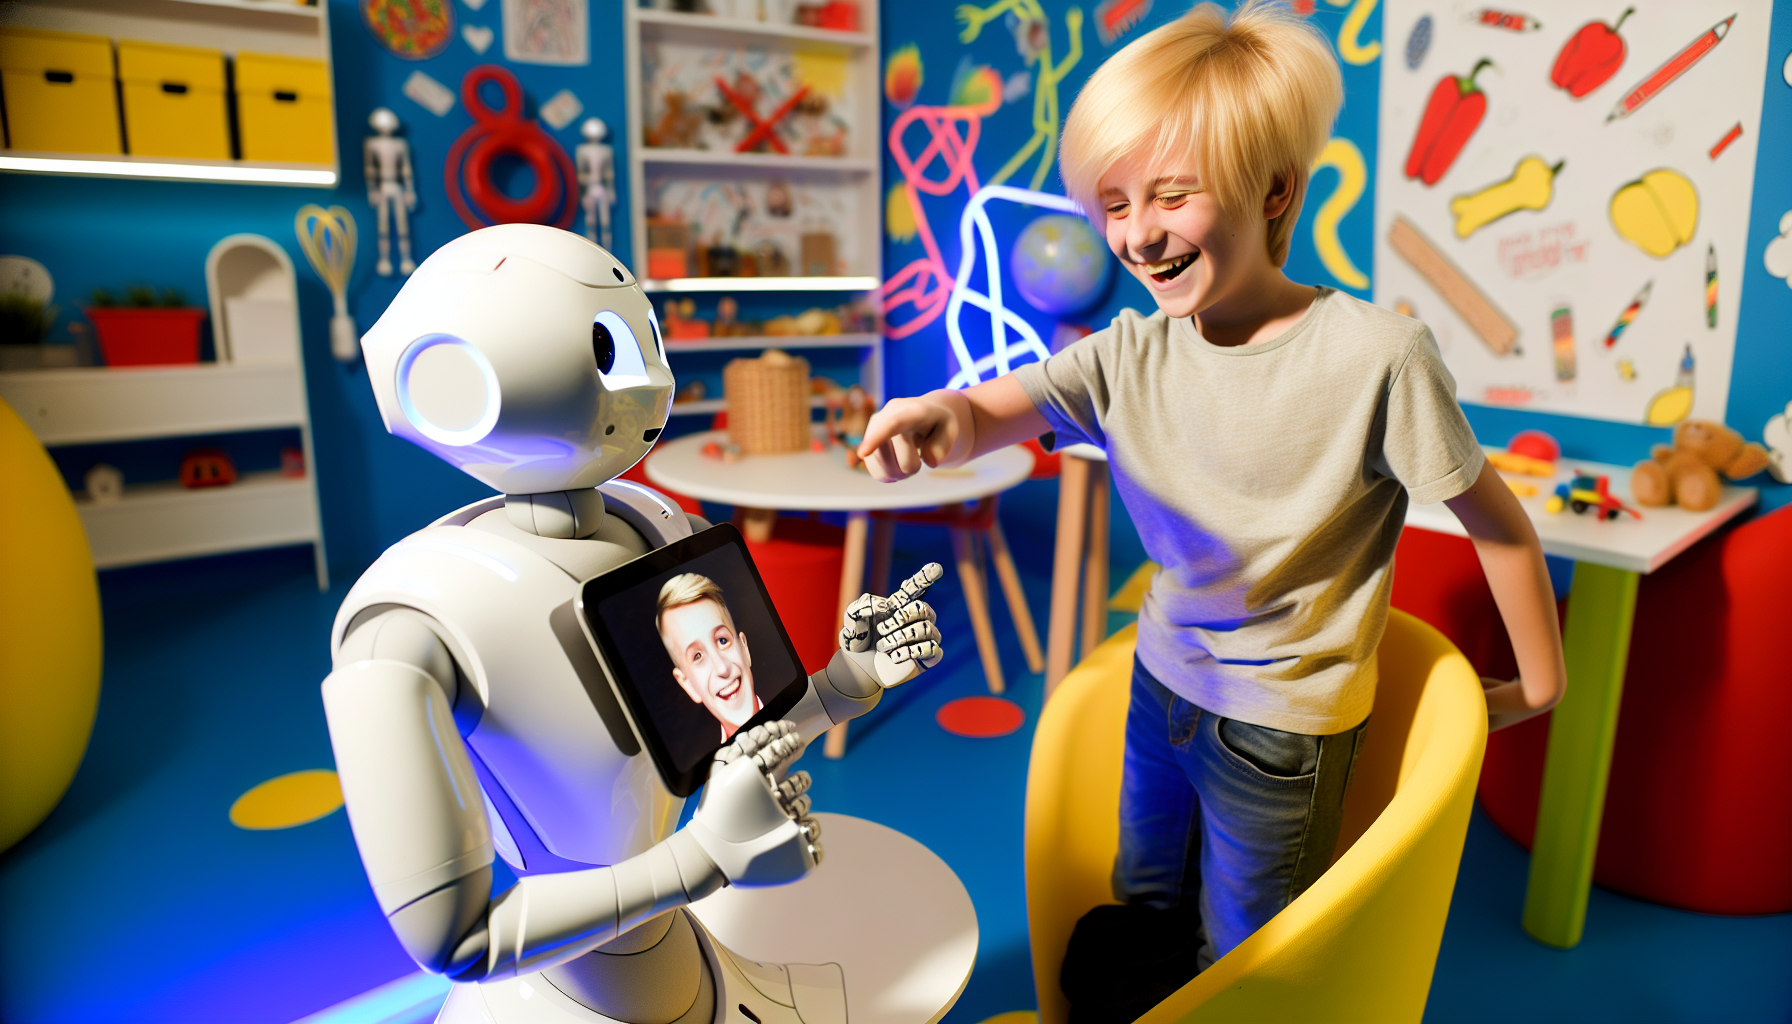 Pepper Robot interacting with a child through meme-based activities